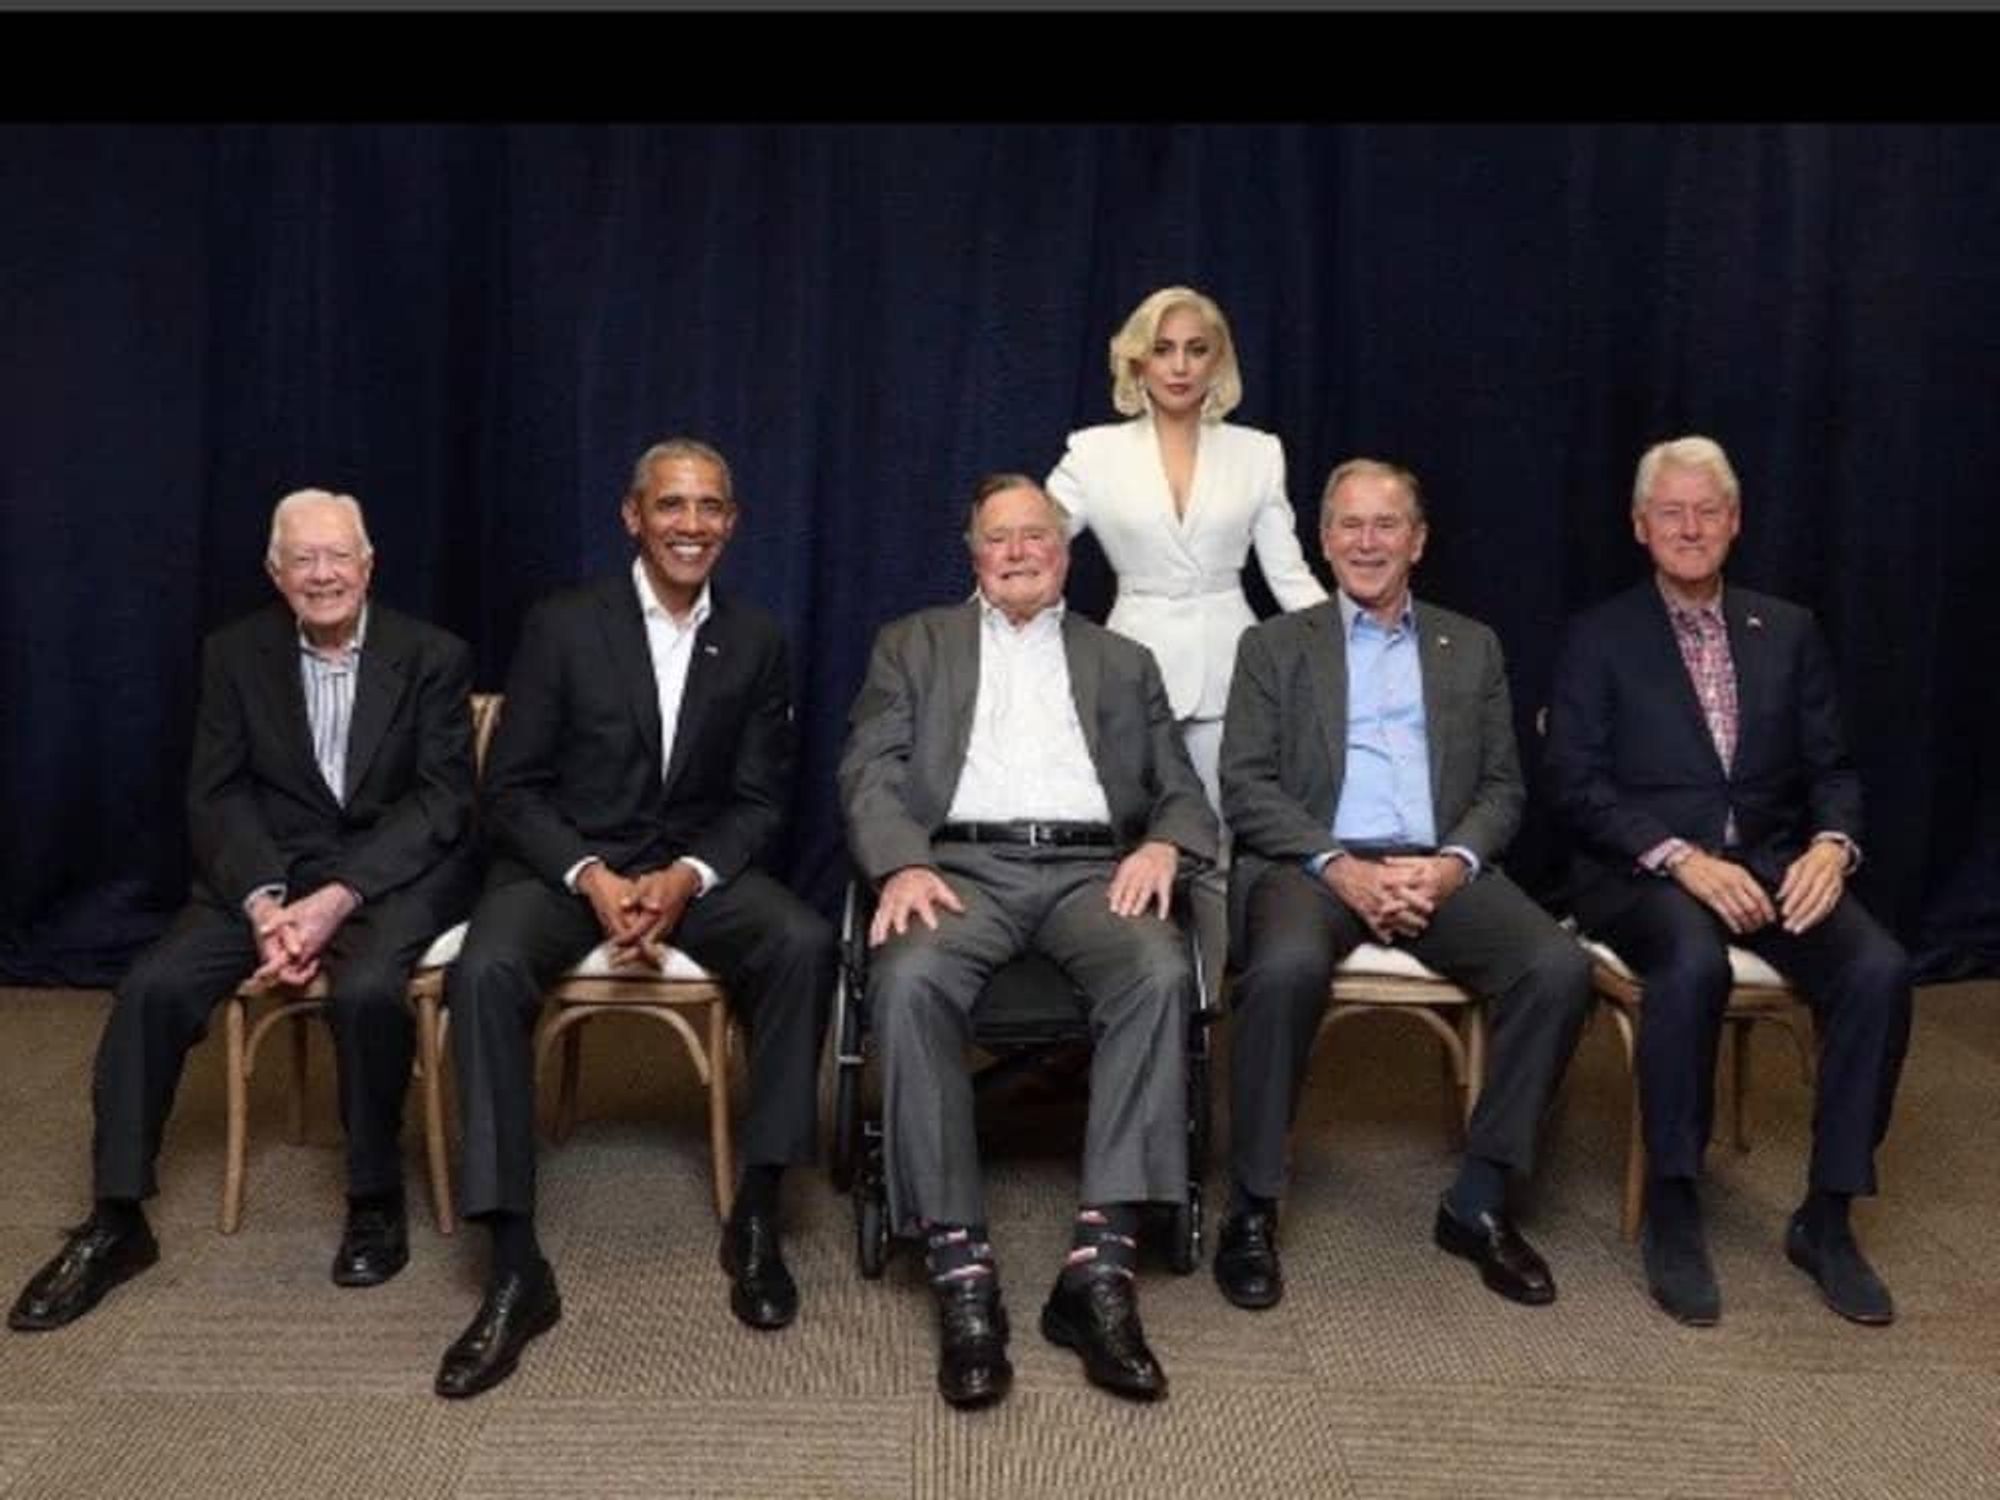 Lady Gaga poses with former presidents Jimmy Carter, Barack Obama, George HW Bush, George W Bush, and BIll Clinton at hurricane relief fundraiser